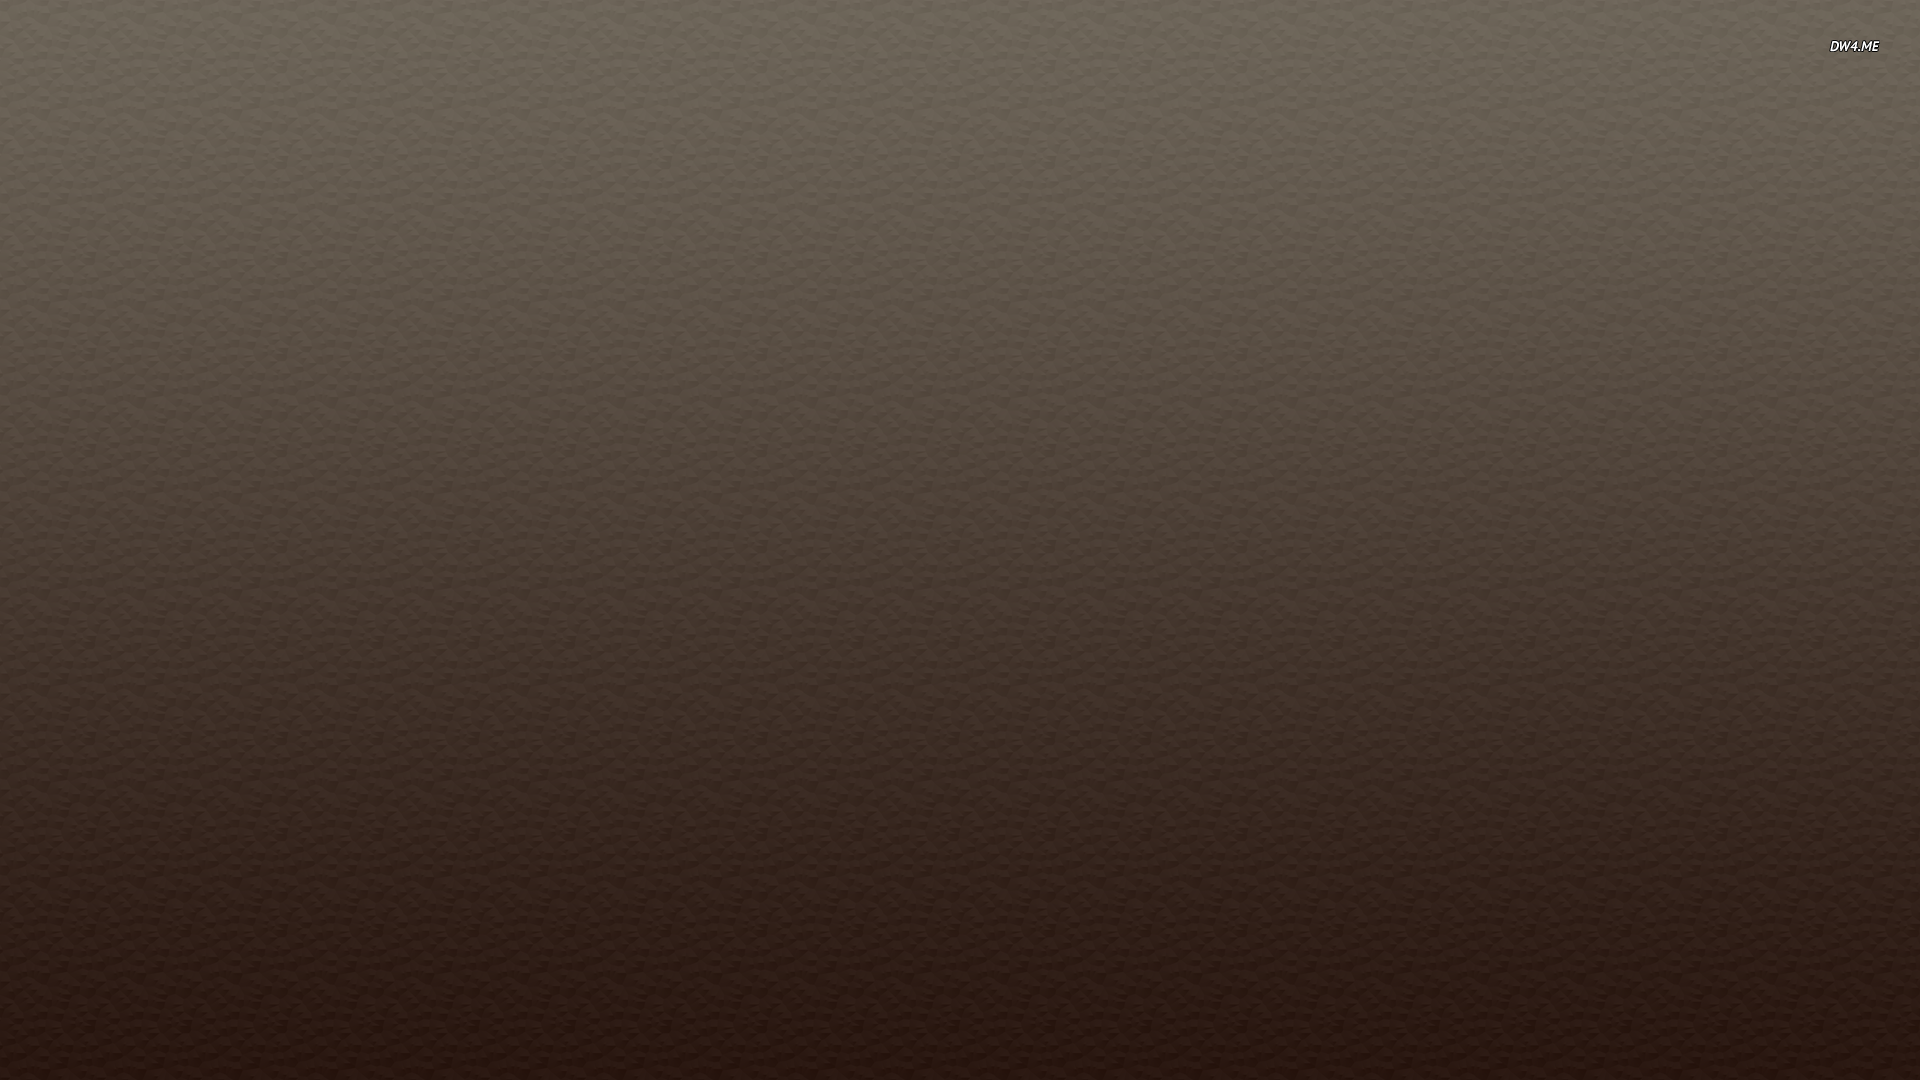 Brown leather wallpaper   Minimalistic wallpapers   170